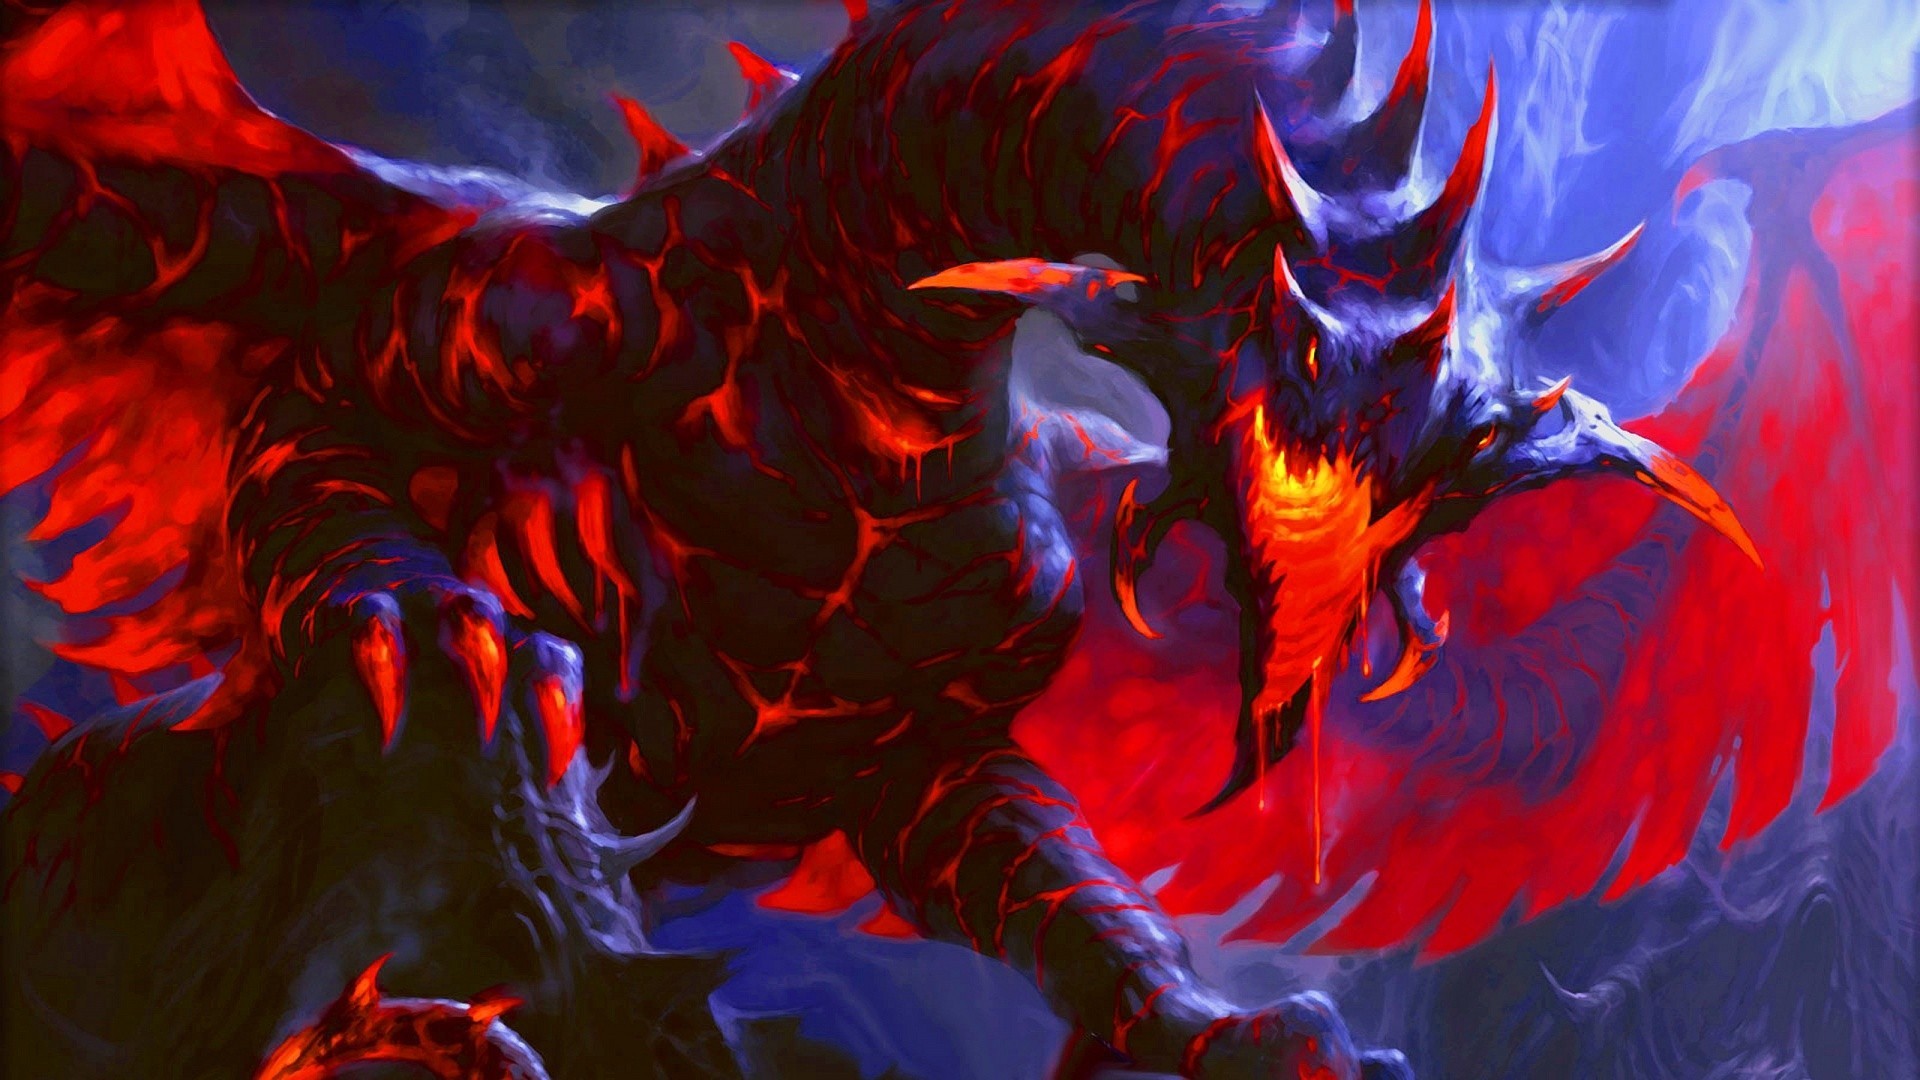 1920x1246 / dragon wallpaper - Coolwallpapers.me!